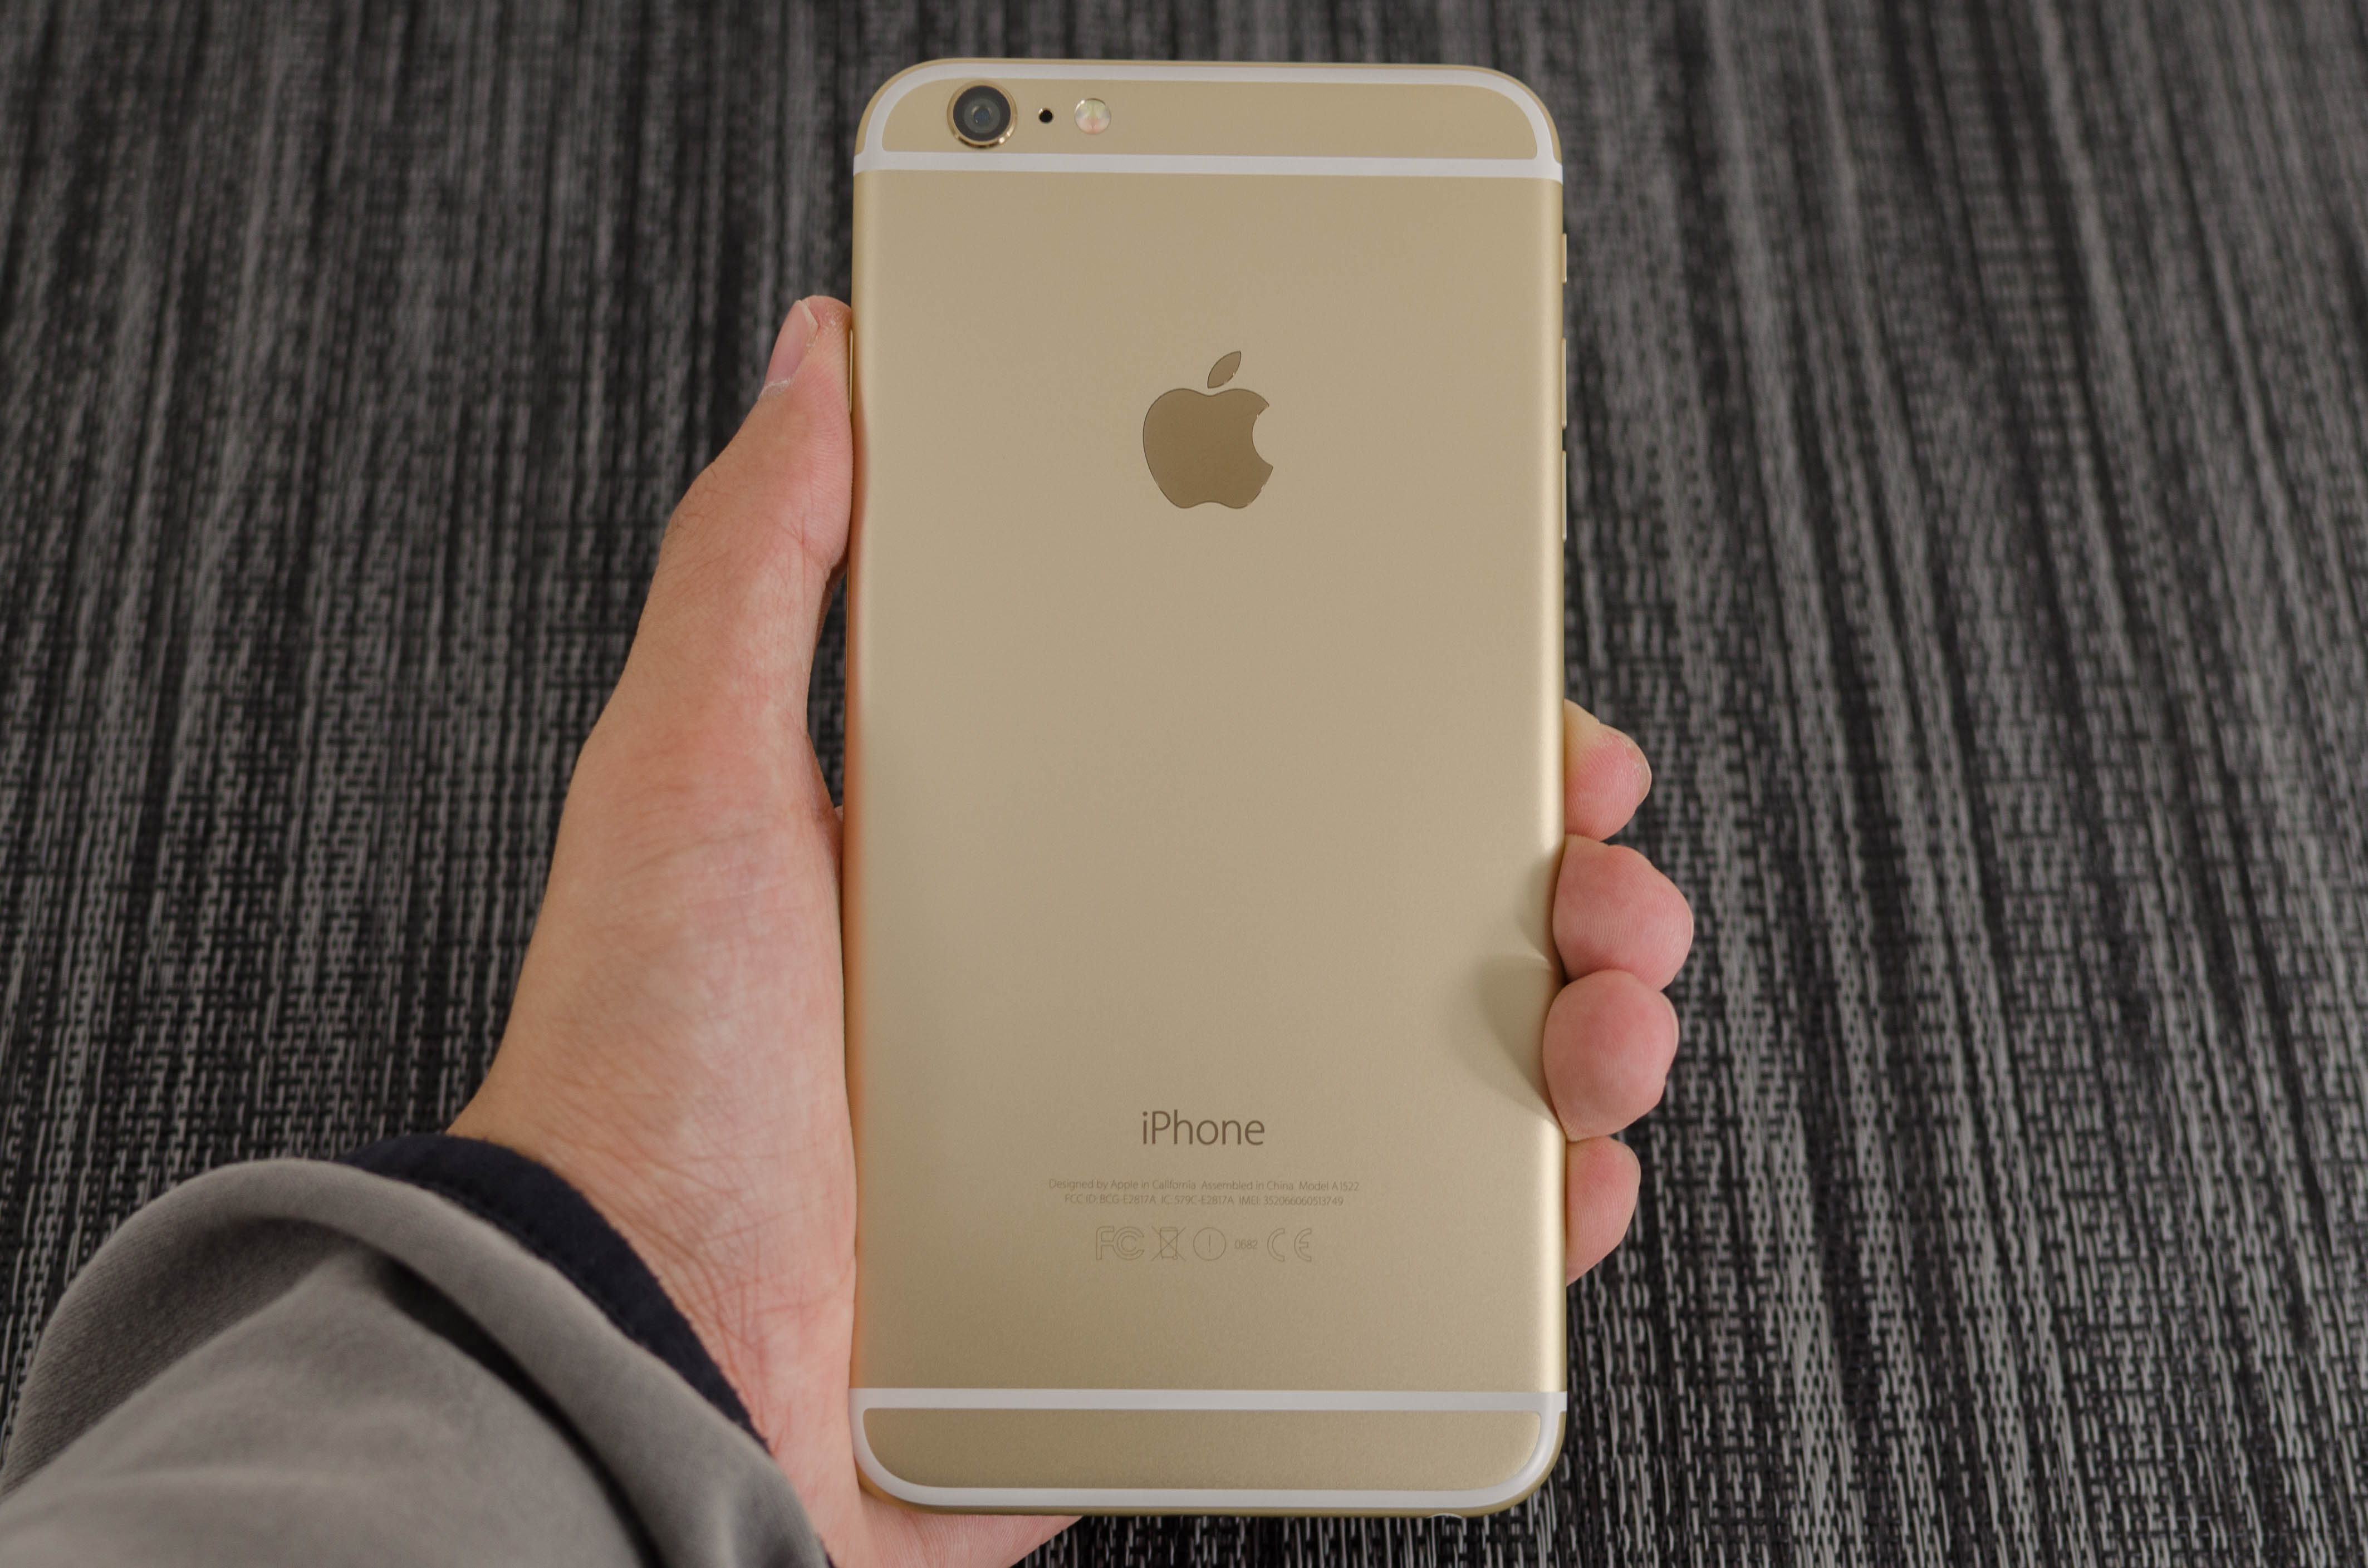 The iPhone 6 Plus MiniReview: Apple\u002639;s First Phablet